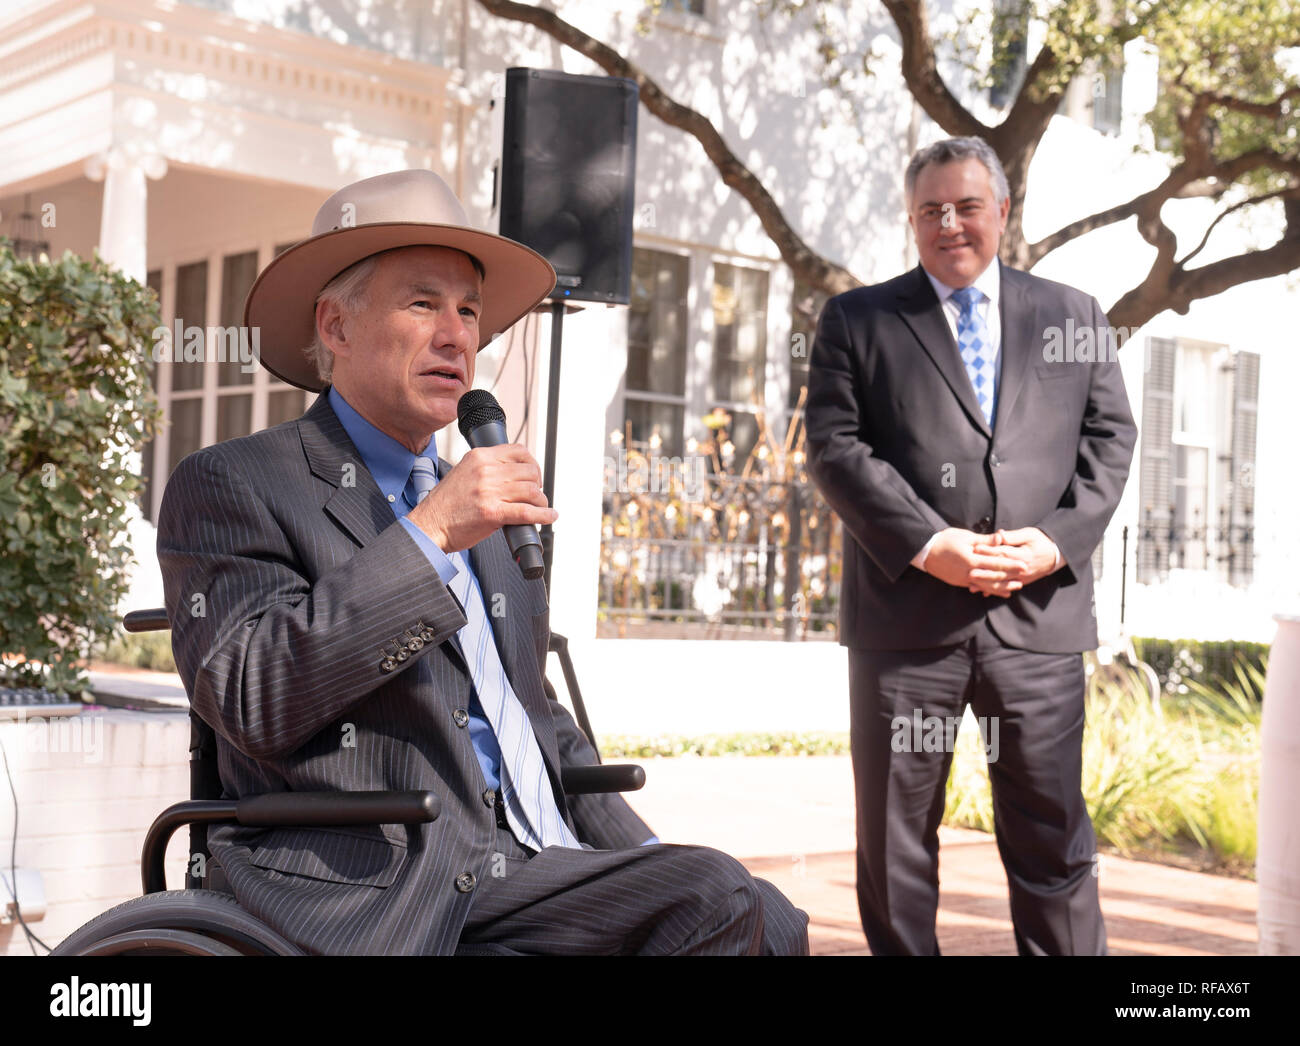 Joe Hockey, Australia's ambassador to the United States, listens to Texas Gov. Greg Abbott (in wheelchair) during the Great Mates Australia-Texas Barbecue at the Governor's Mansion. Abbott and Hockey worked to strengthen ties between the allies discussing agriculture and high tech before eating Australian Vegemite burnt ends and HeartBrand Akaushi beef. Stock Photo